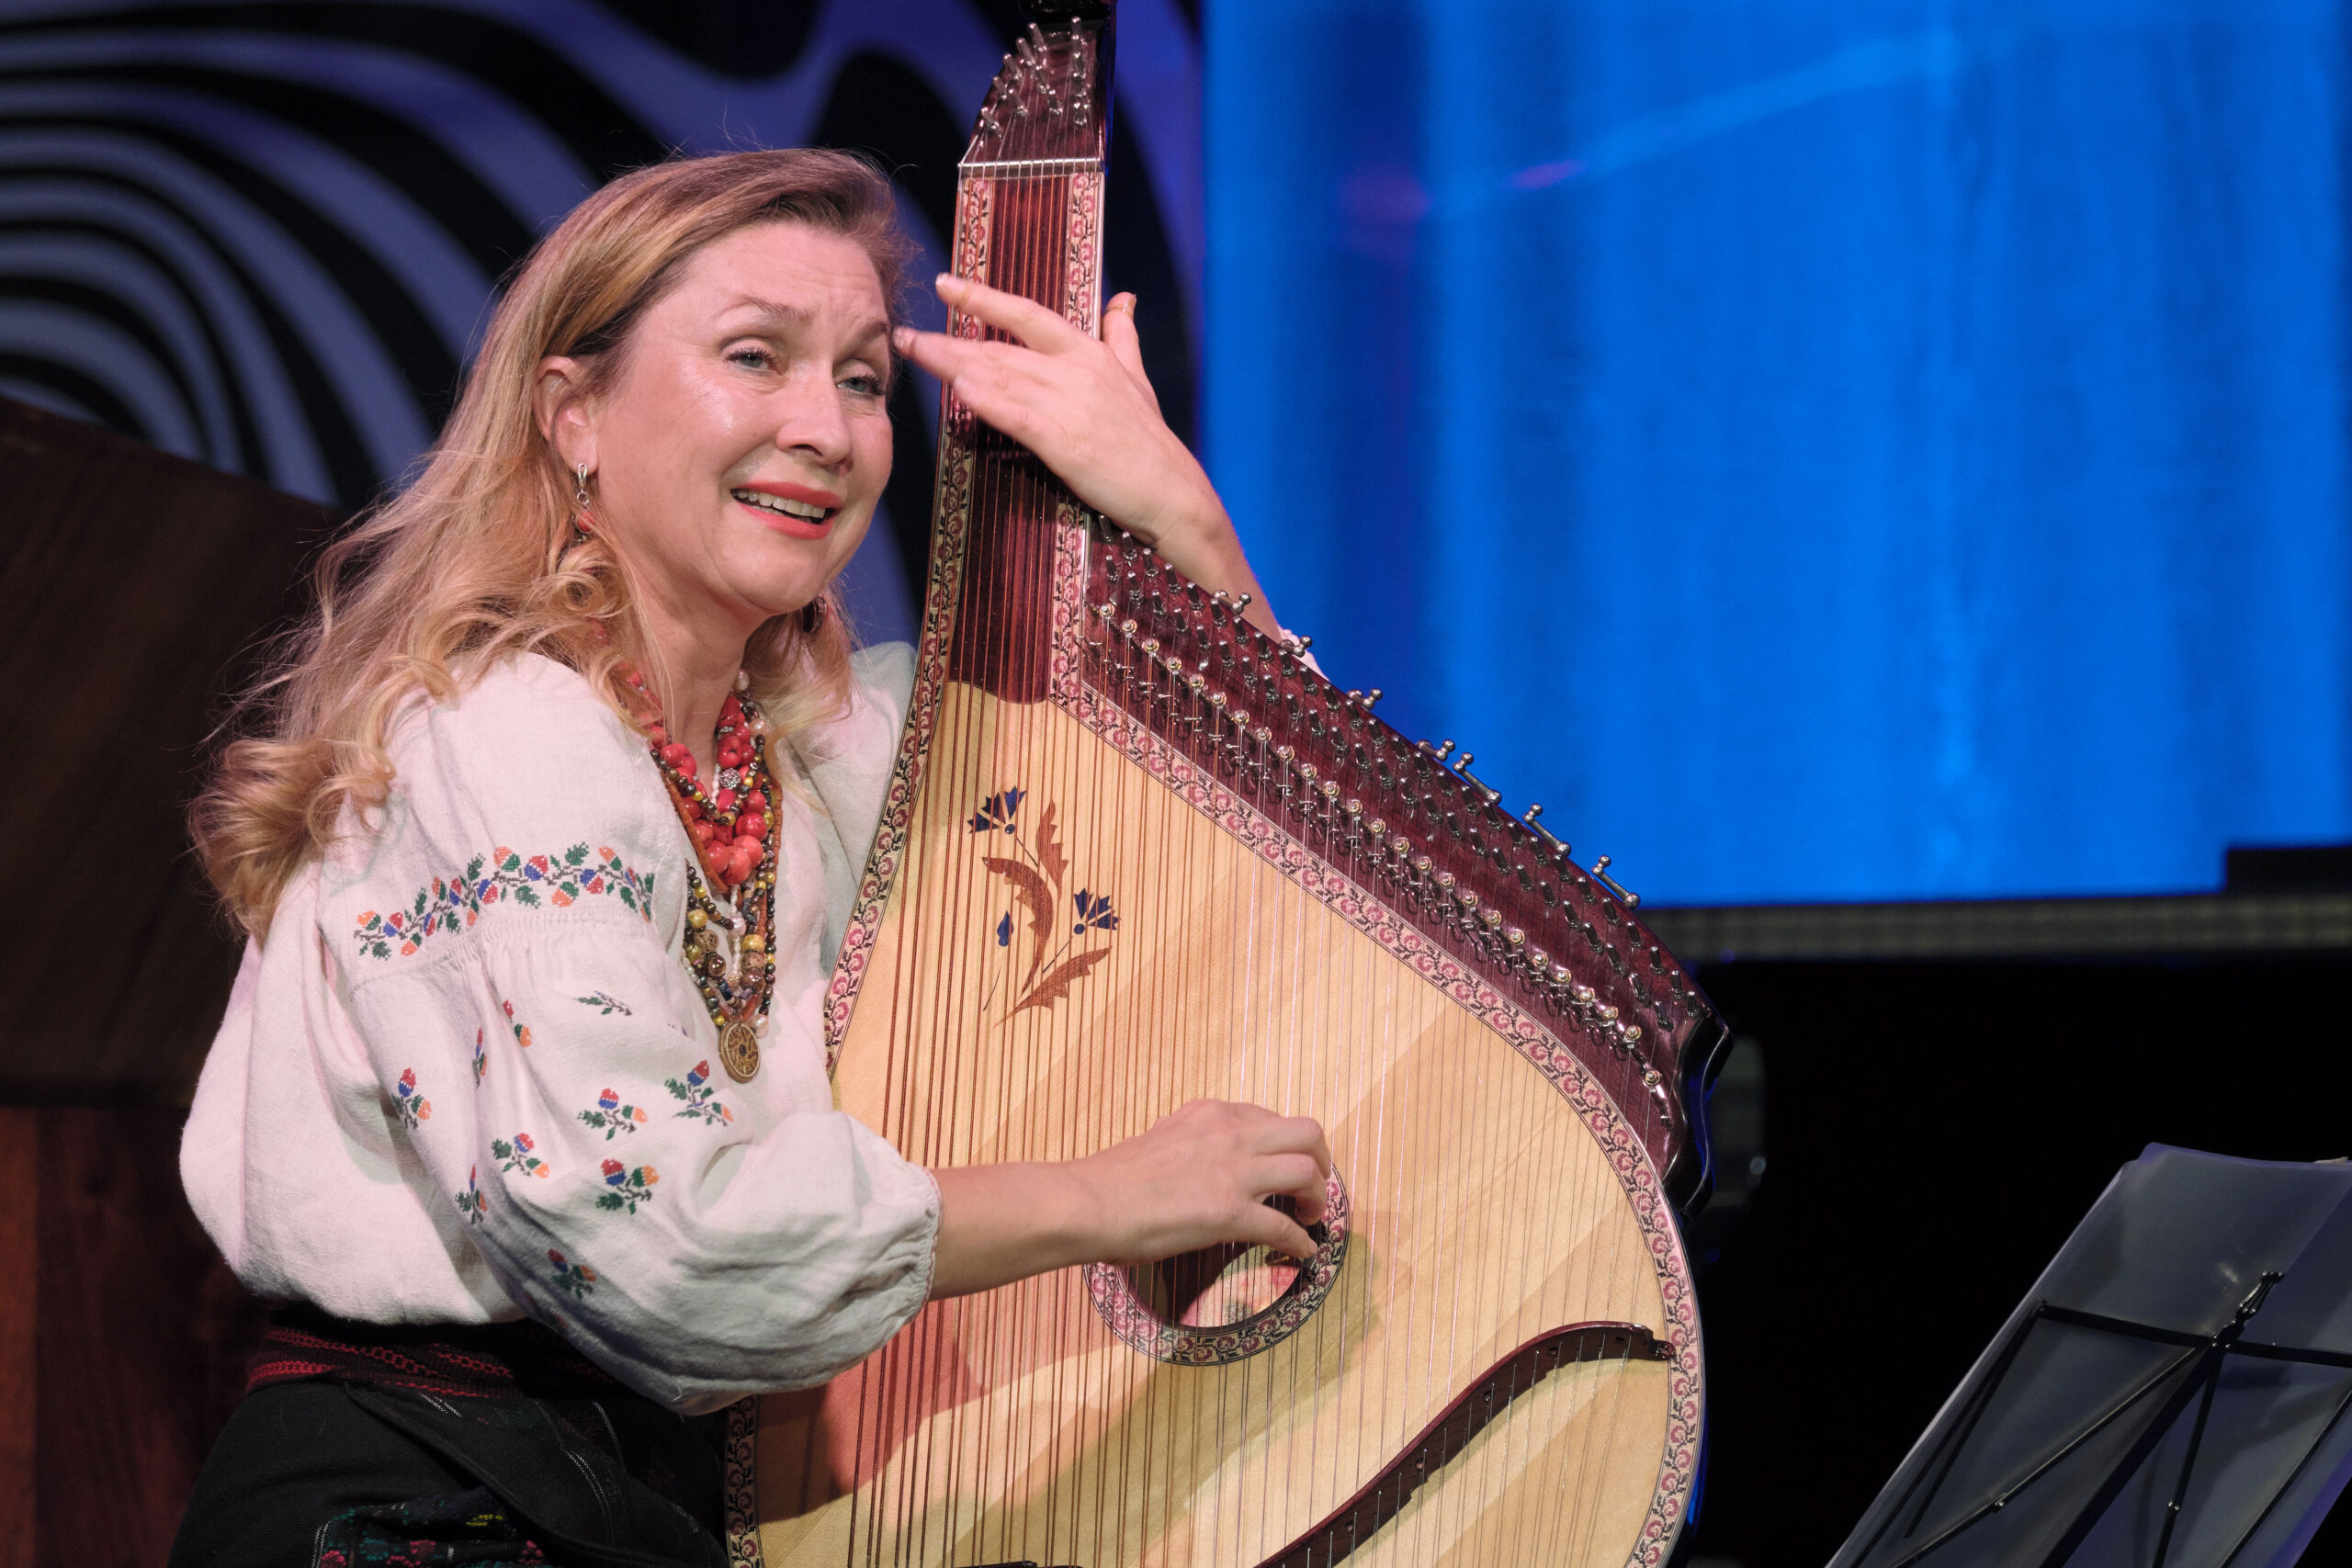 Larissa Kovalchuk performs on a bandura, a Ukrainian plucked string folk instrument, during <i>The Last Mile</i>, the final concert of the 2022 Canberra International Music Festival. Photo © Peter Hislop.